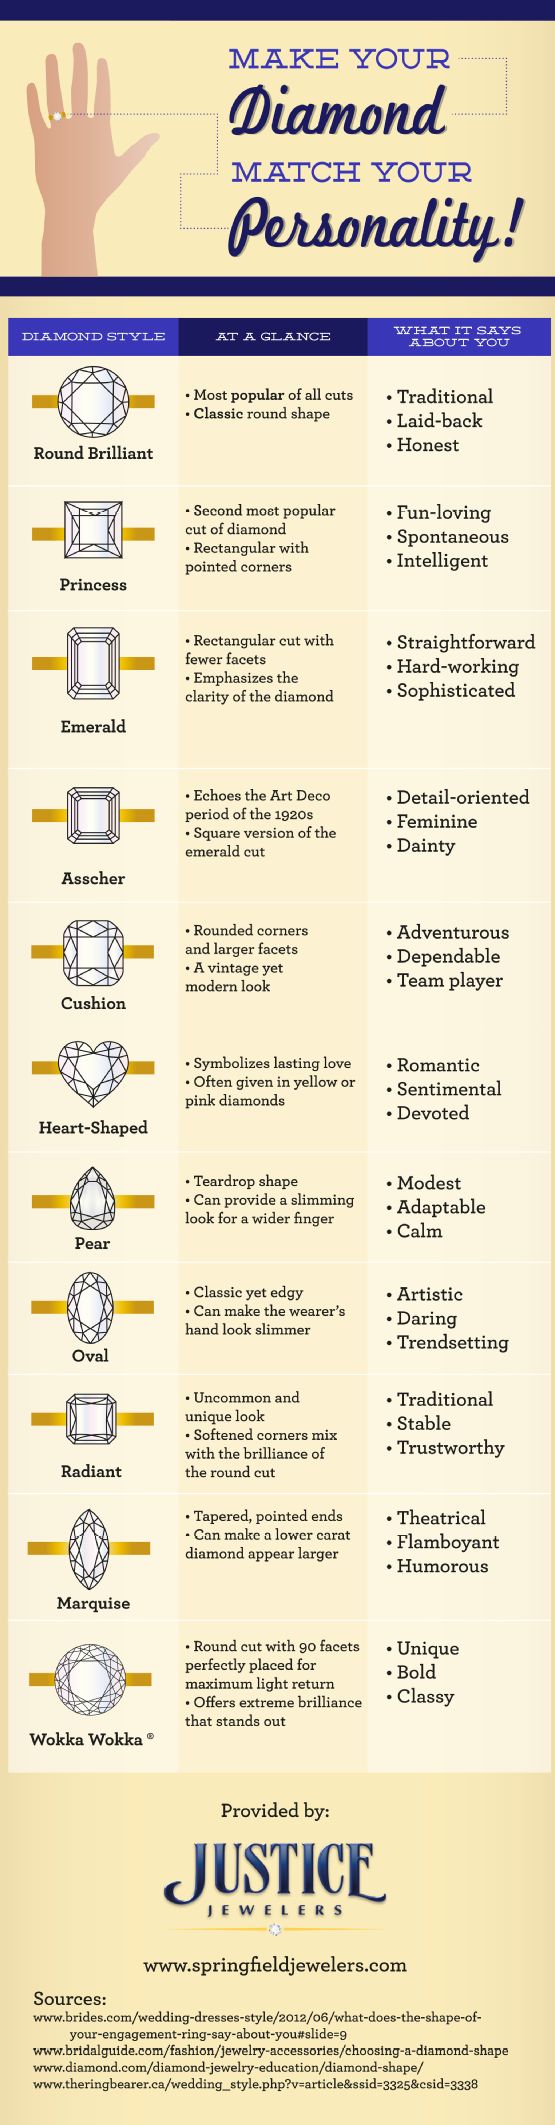 How to choose wedding rings